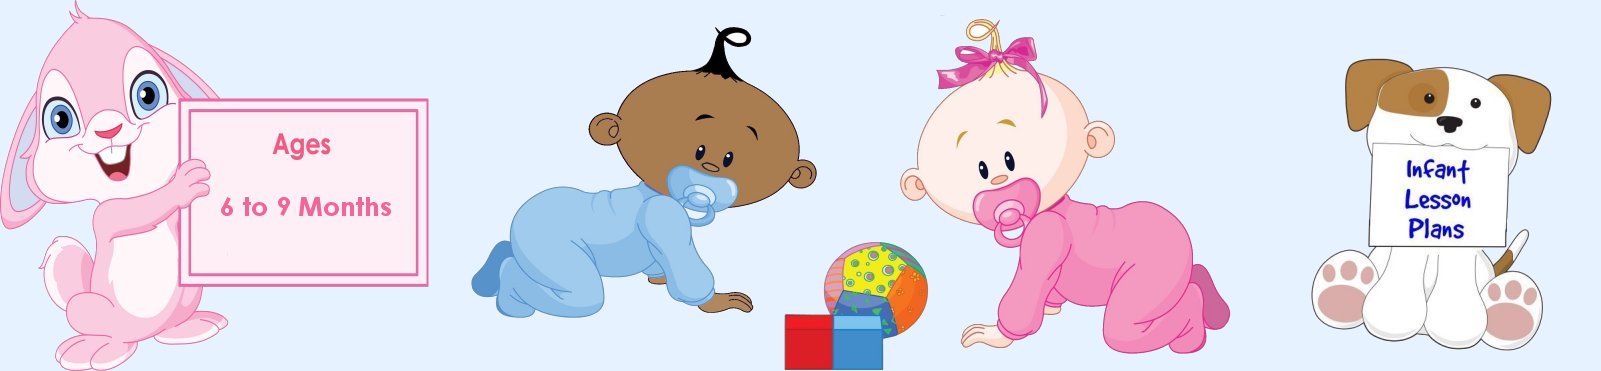 Infant Activity Lesson Plans 6 to 9 Months Old